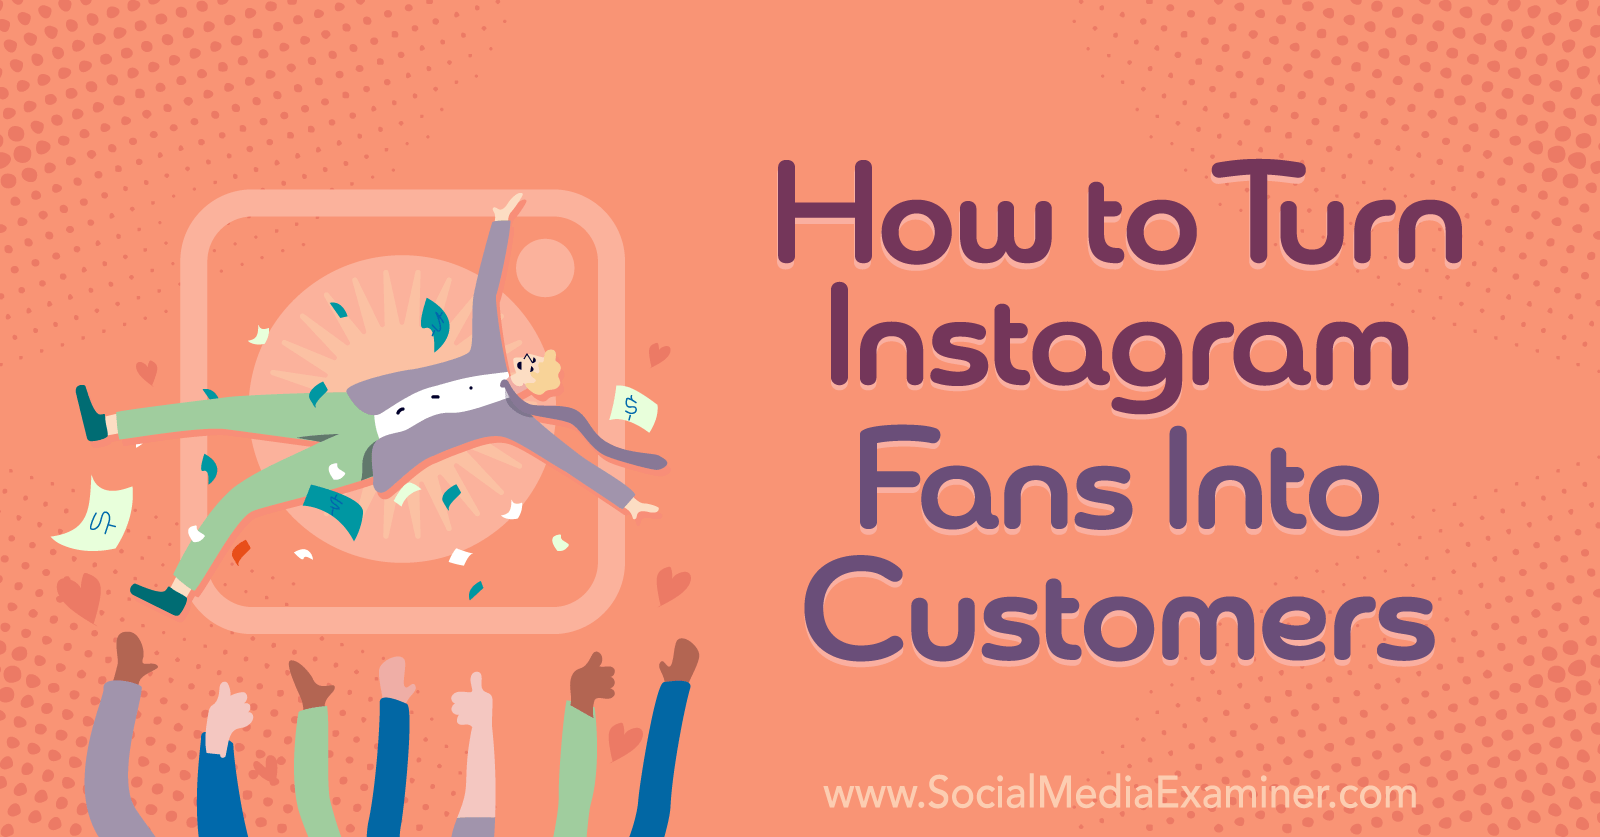 How to turn instagram fans into customers-Social Media Examiner